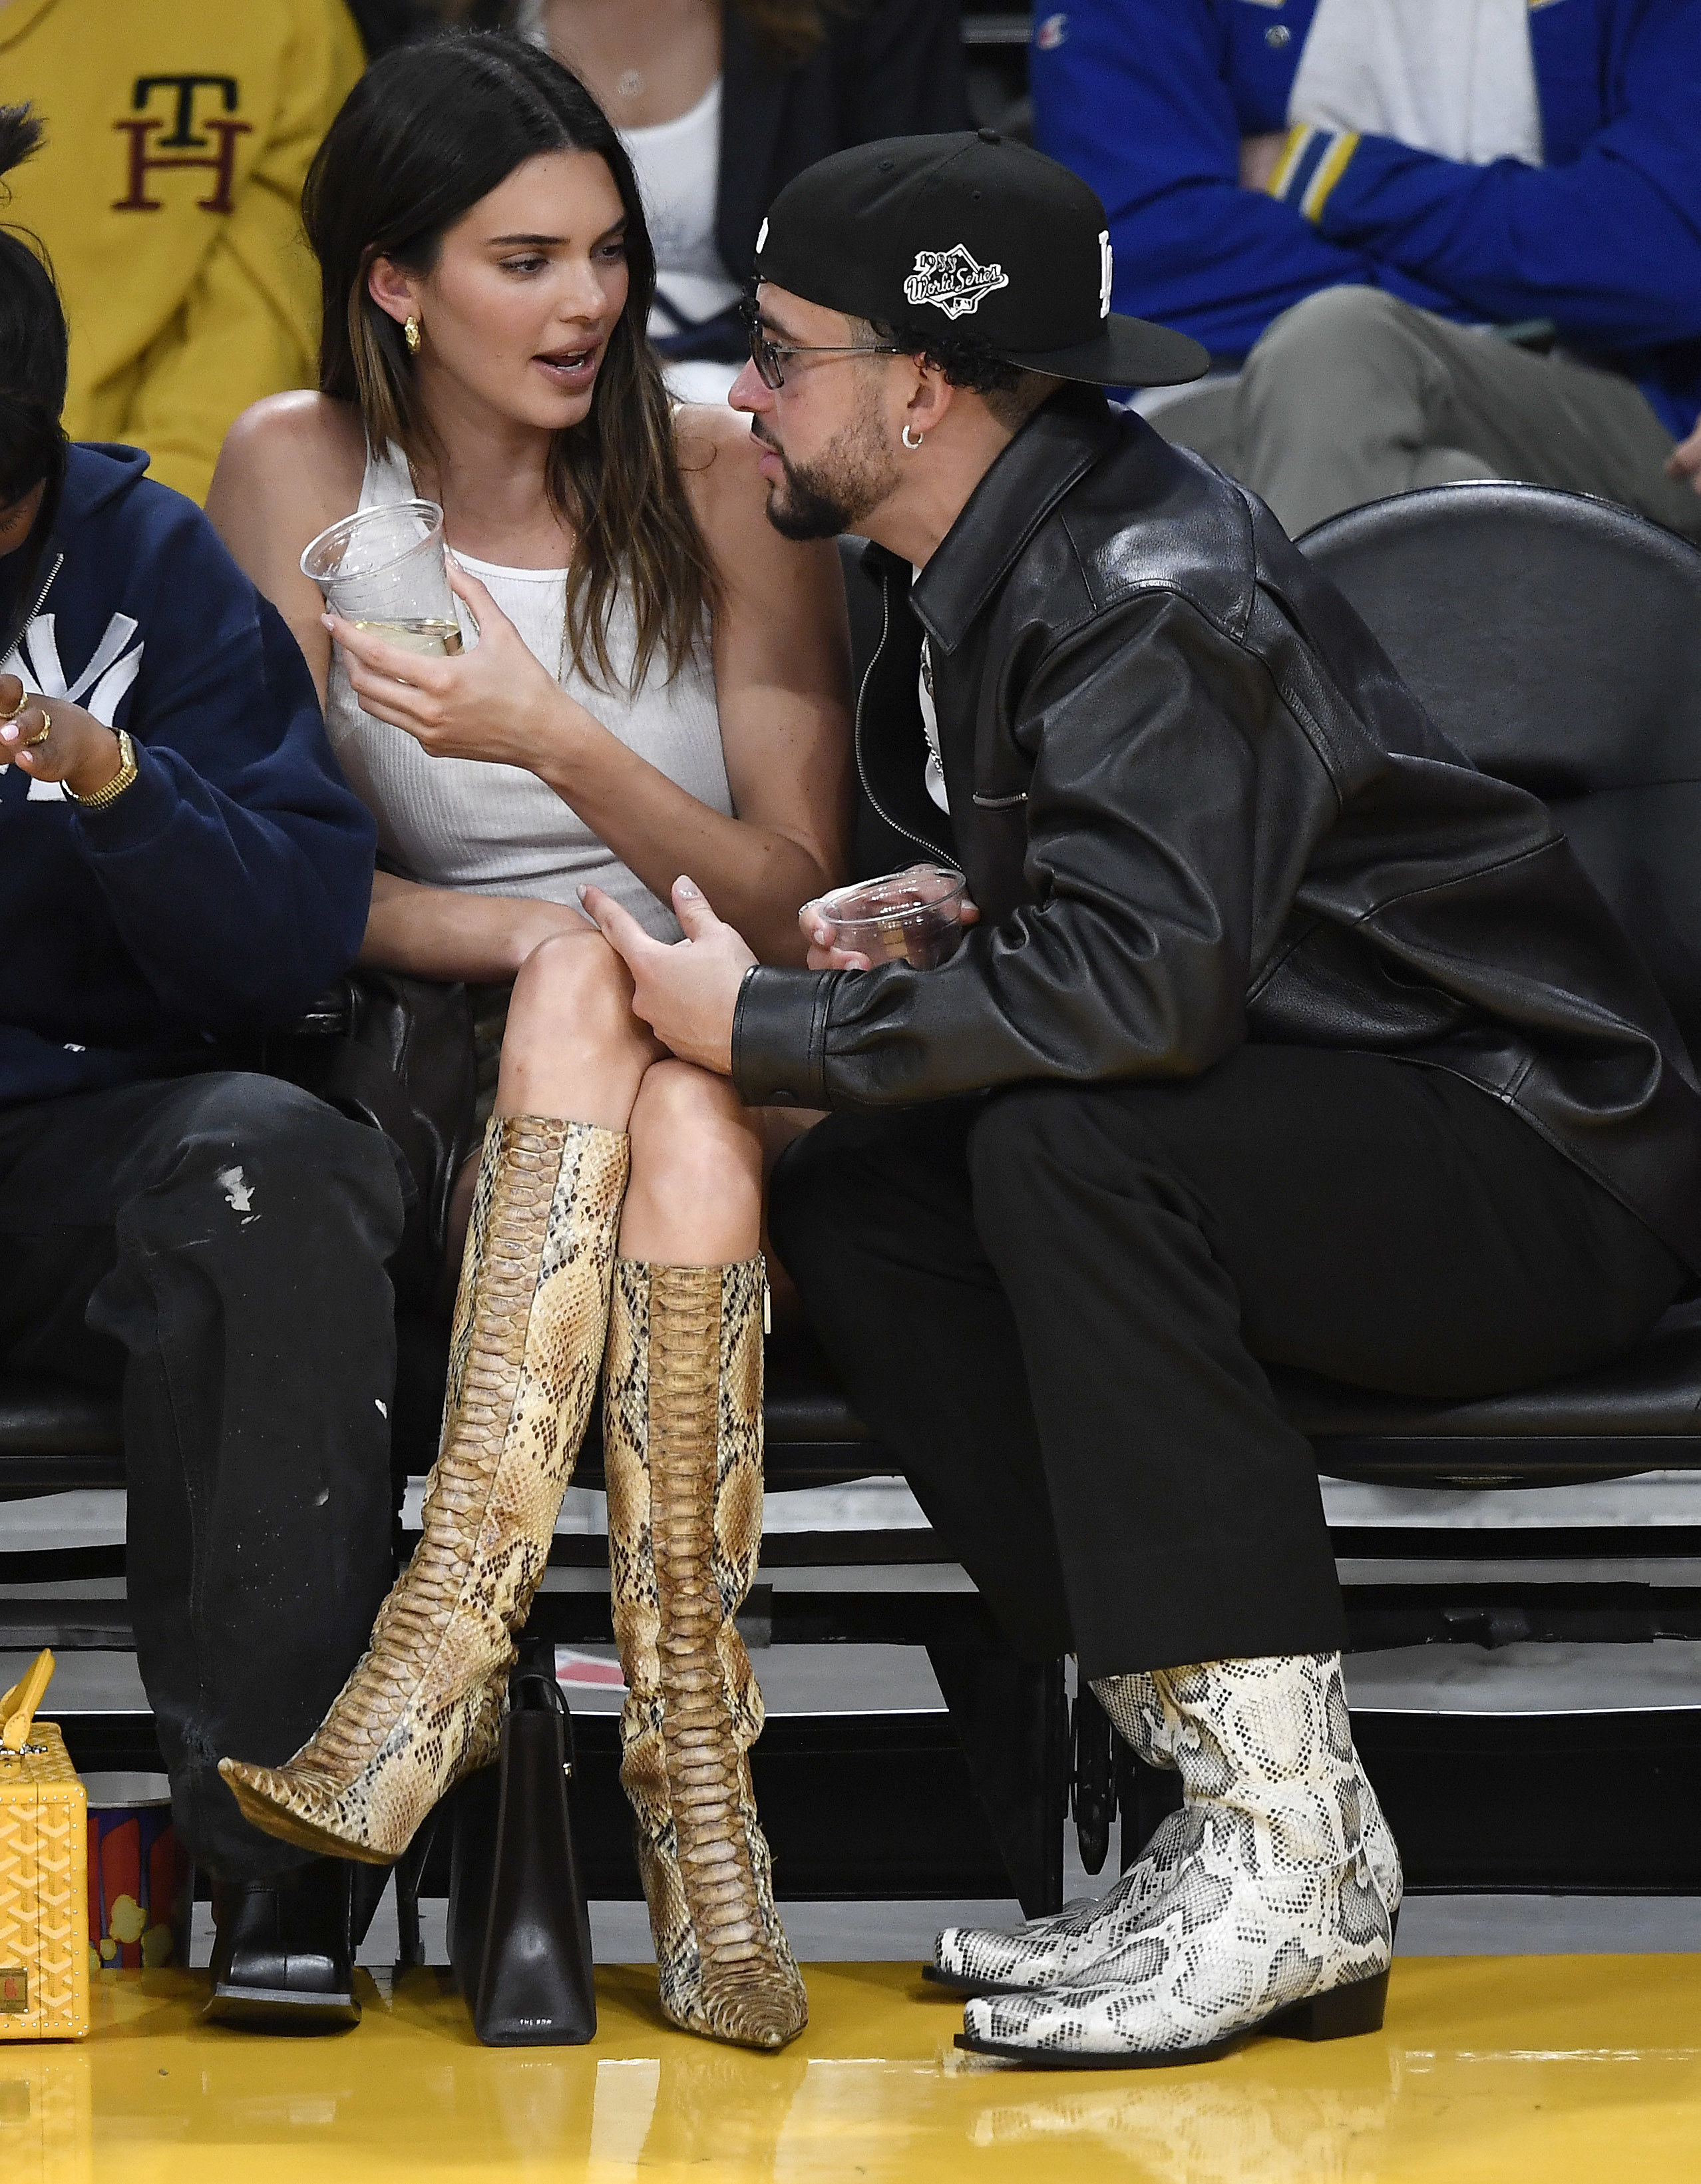 Kendall and Bunny sitting together at a sports event